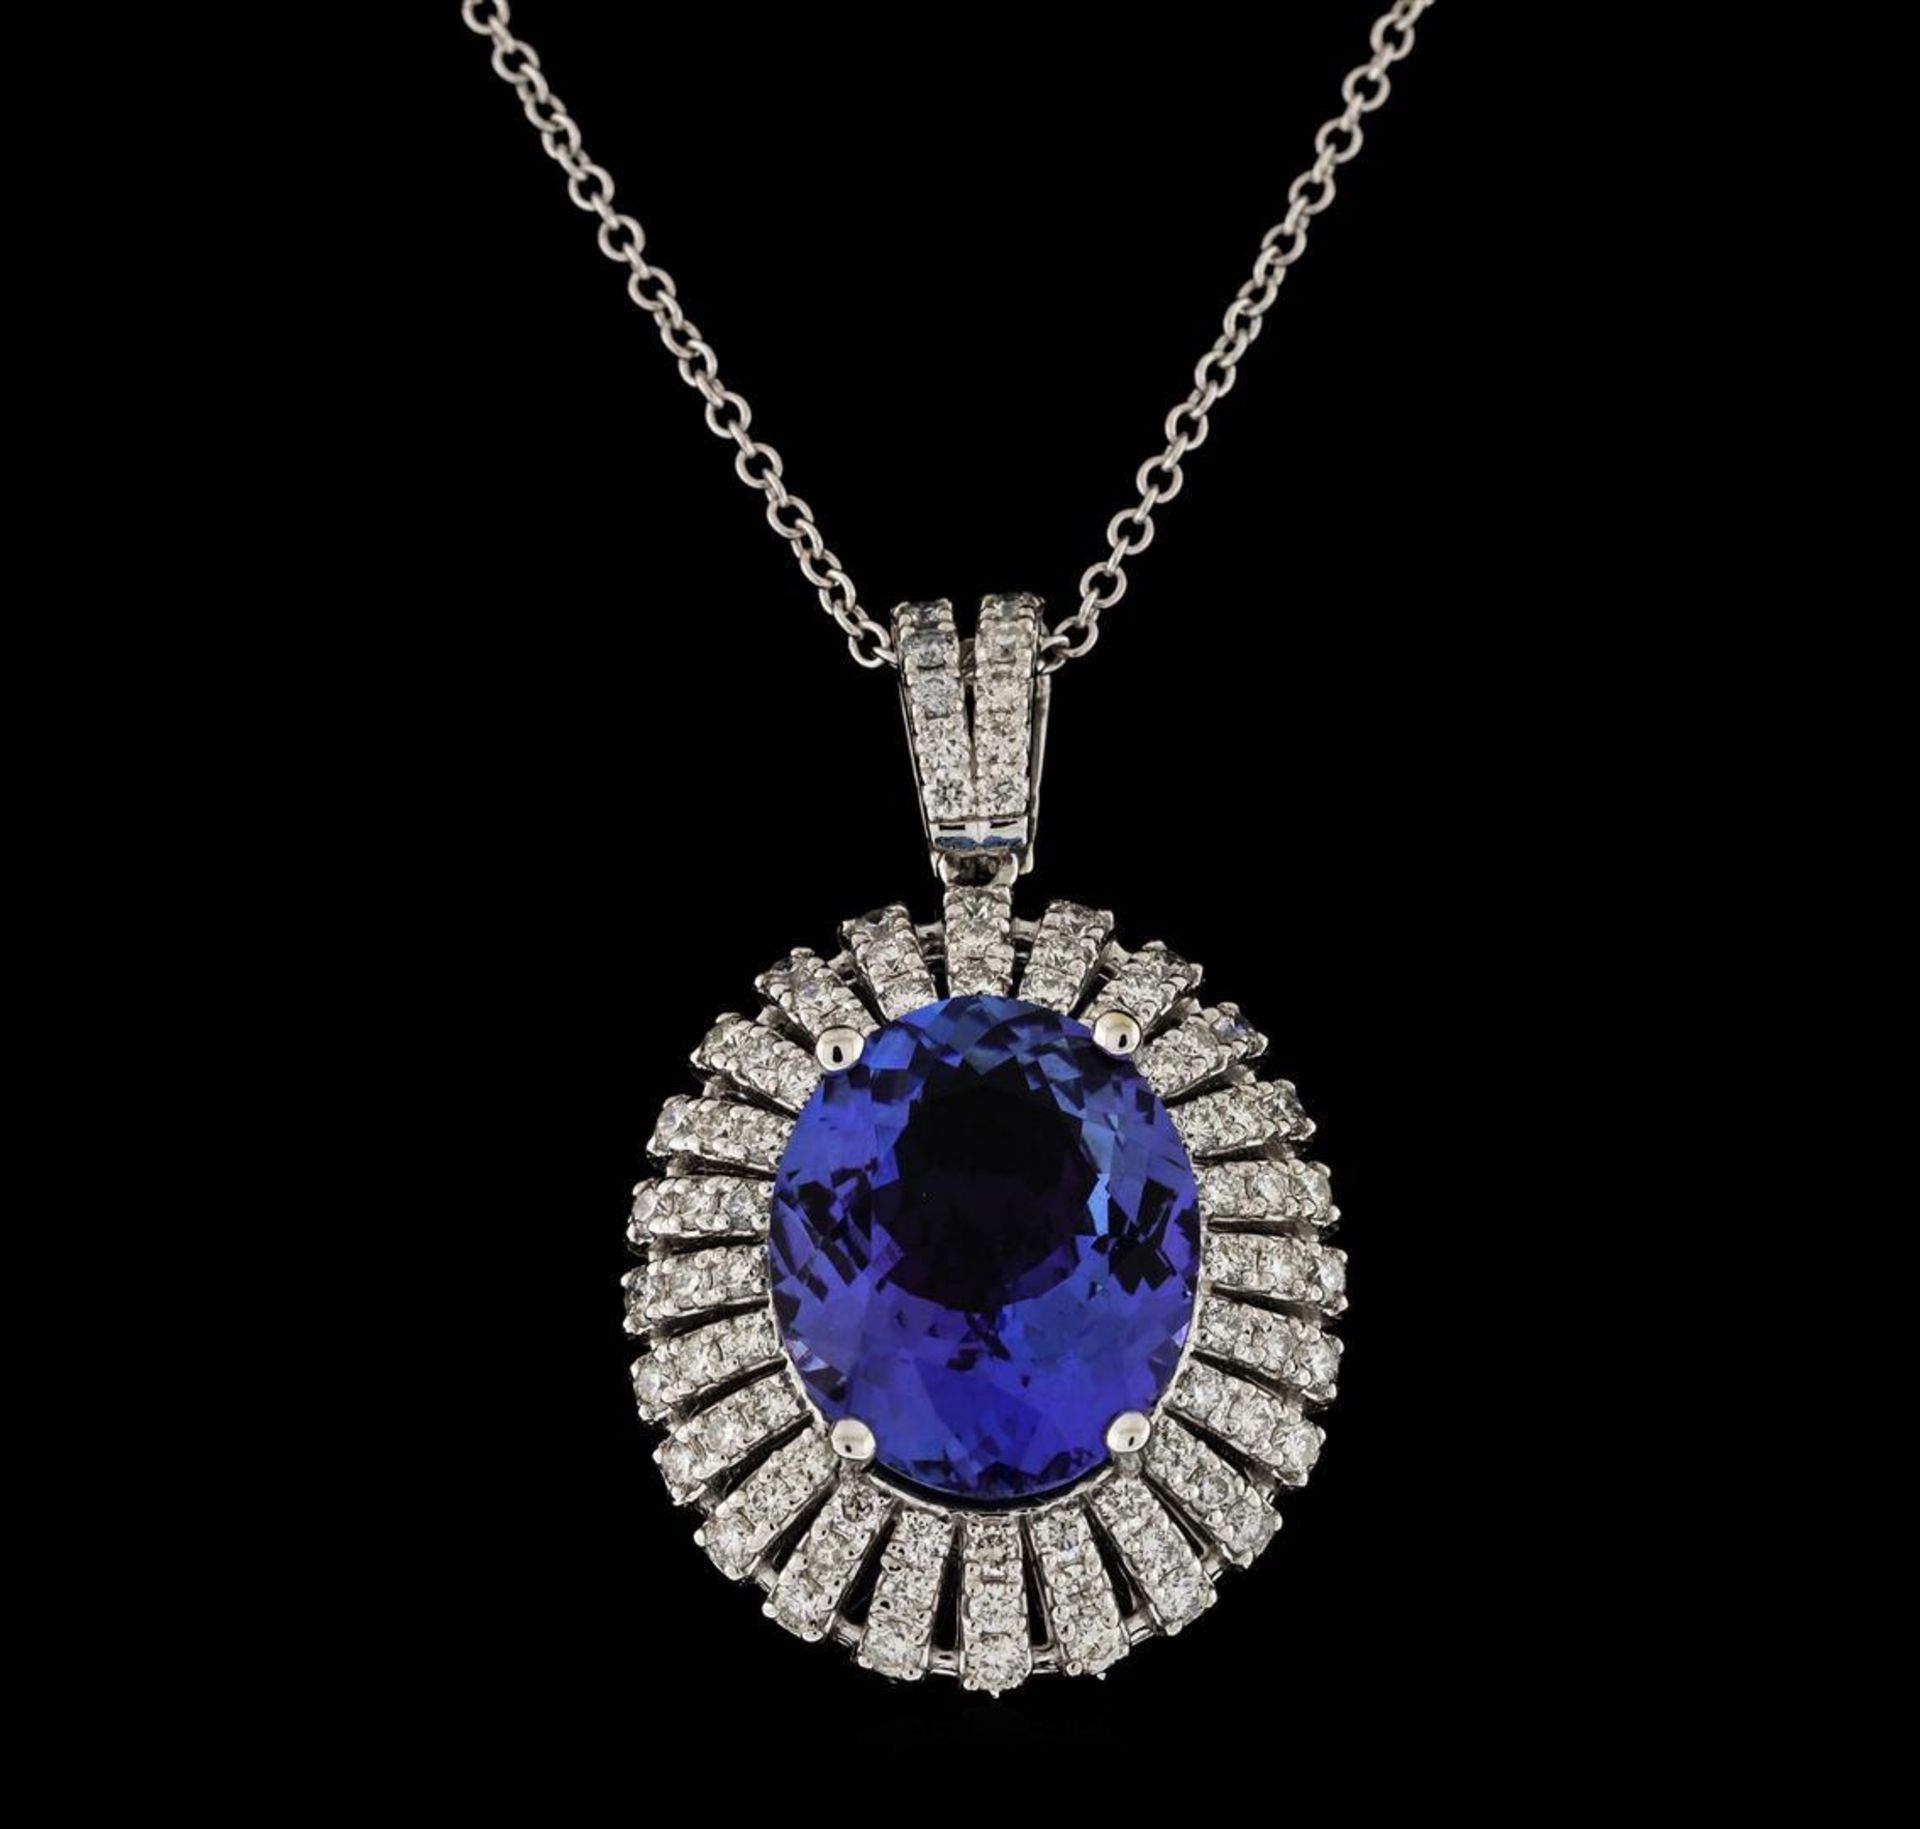 6.81 ctw Tanzanite and Diamond Pendant With Chain - 14KT White Gold - Image 2 of 3